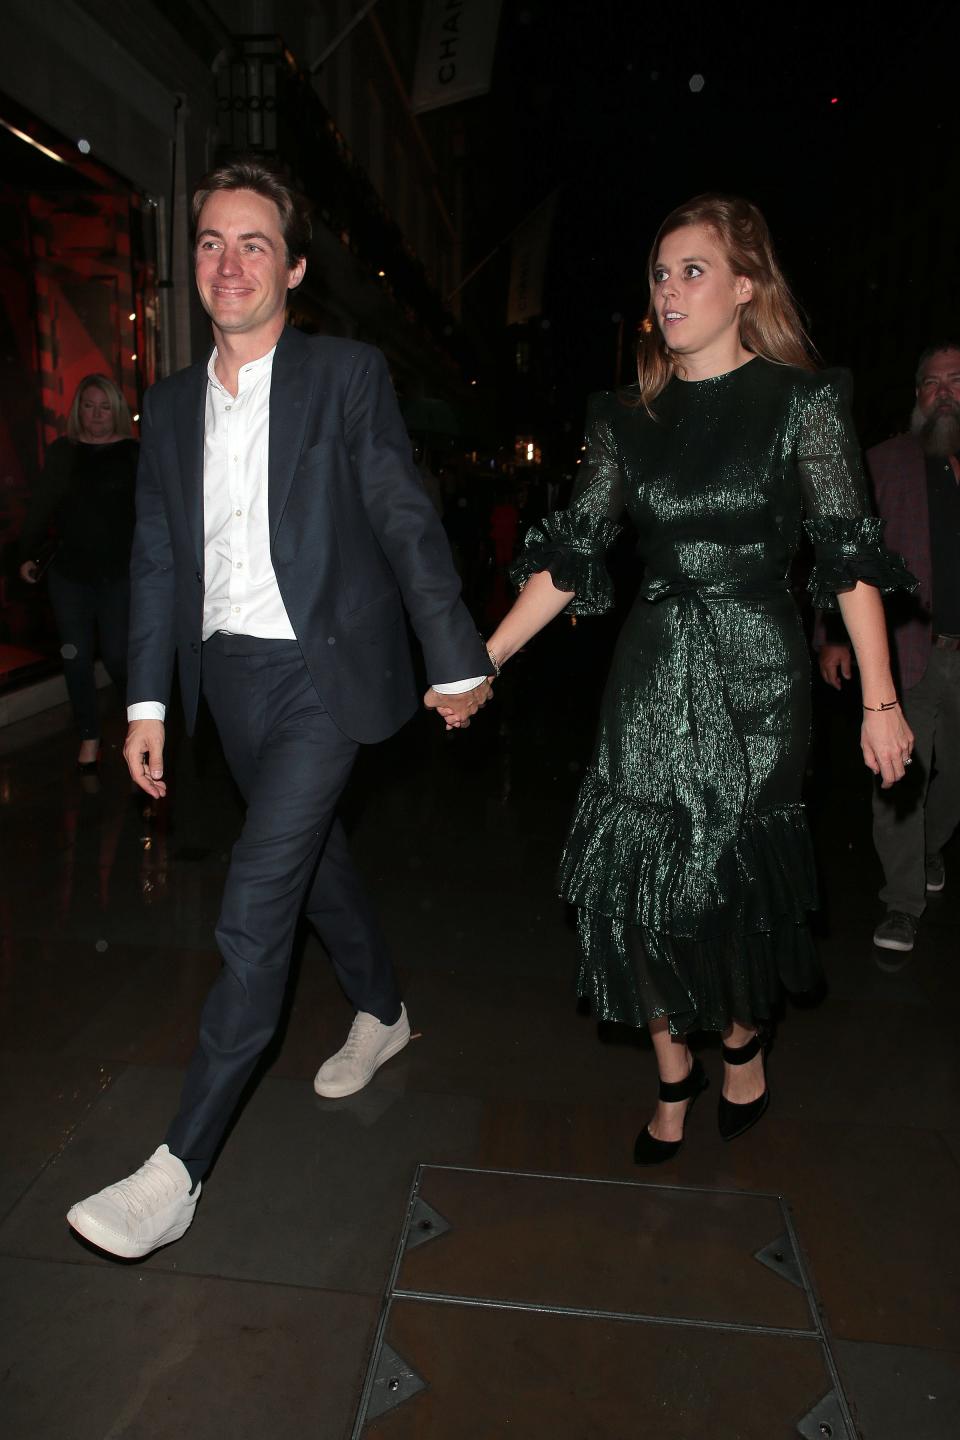 Princess Beatrice wearing a green sparkly dress